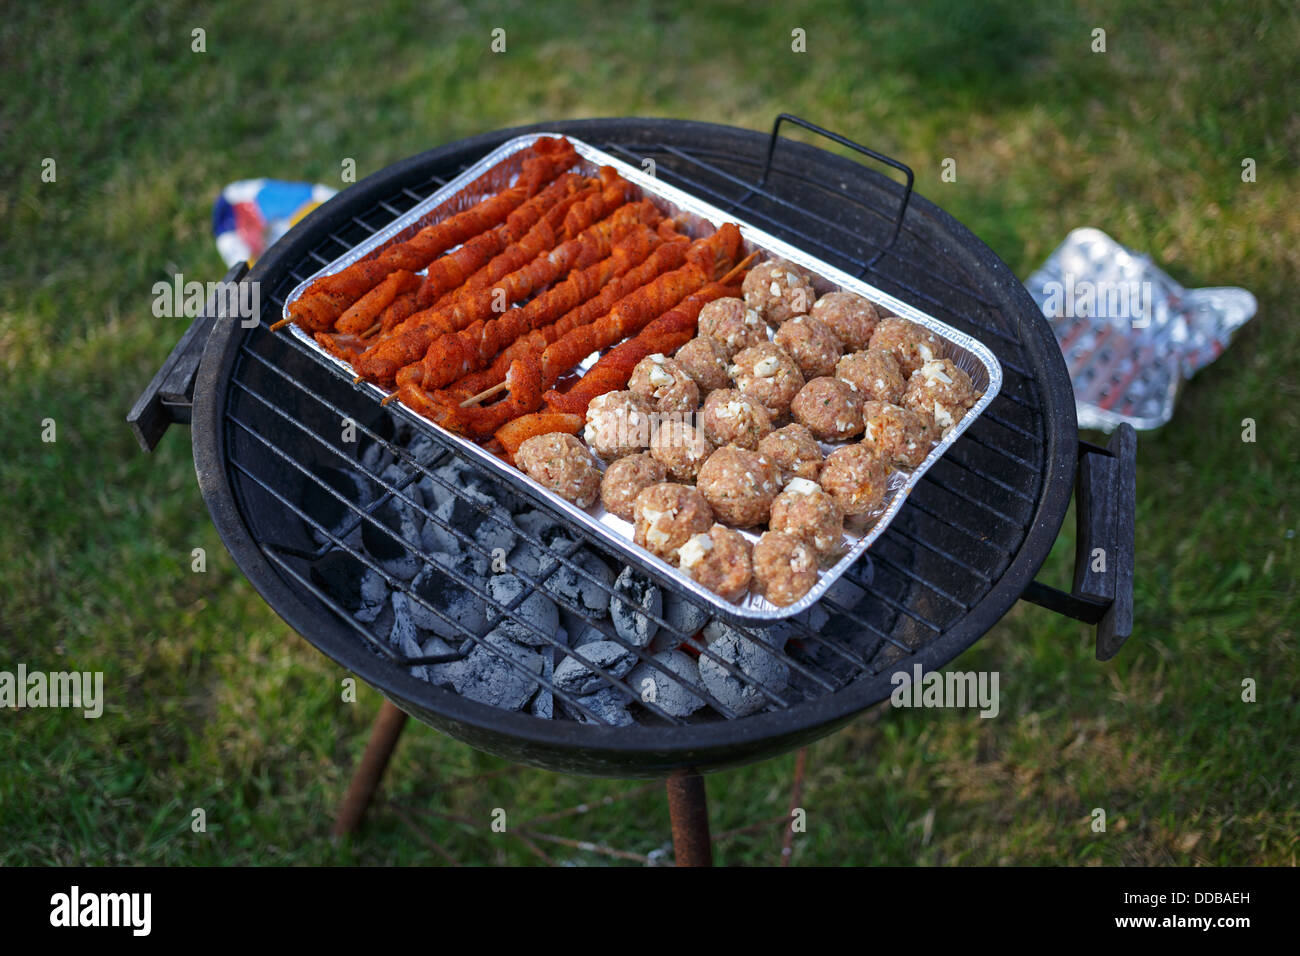 Emden, Germany, on a charcoal grill in a foil dish are meat and Hackbaellchen torches Stock Photo